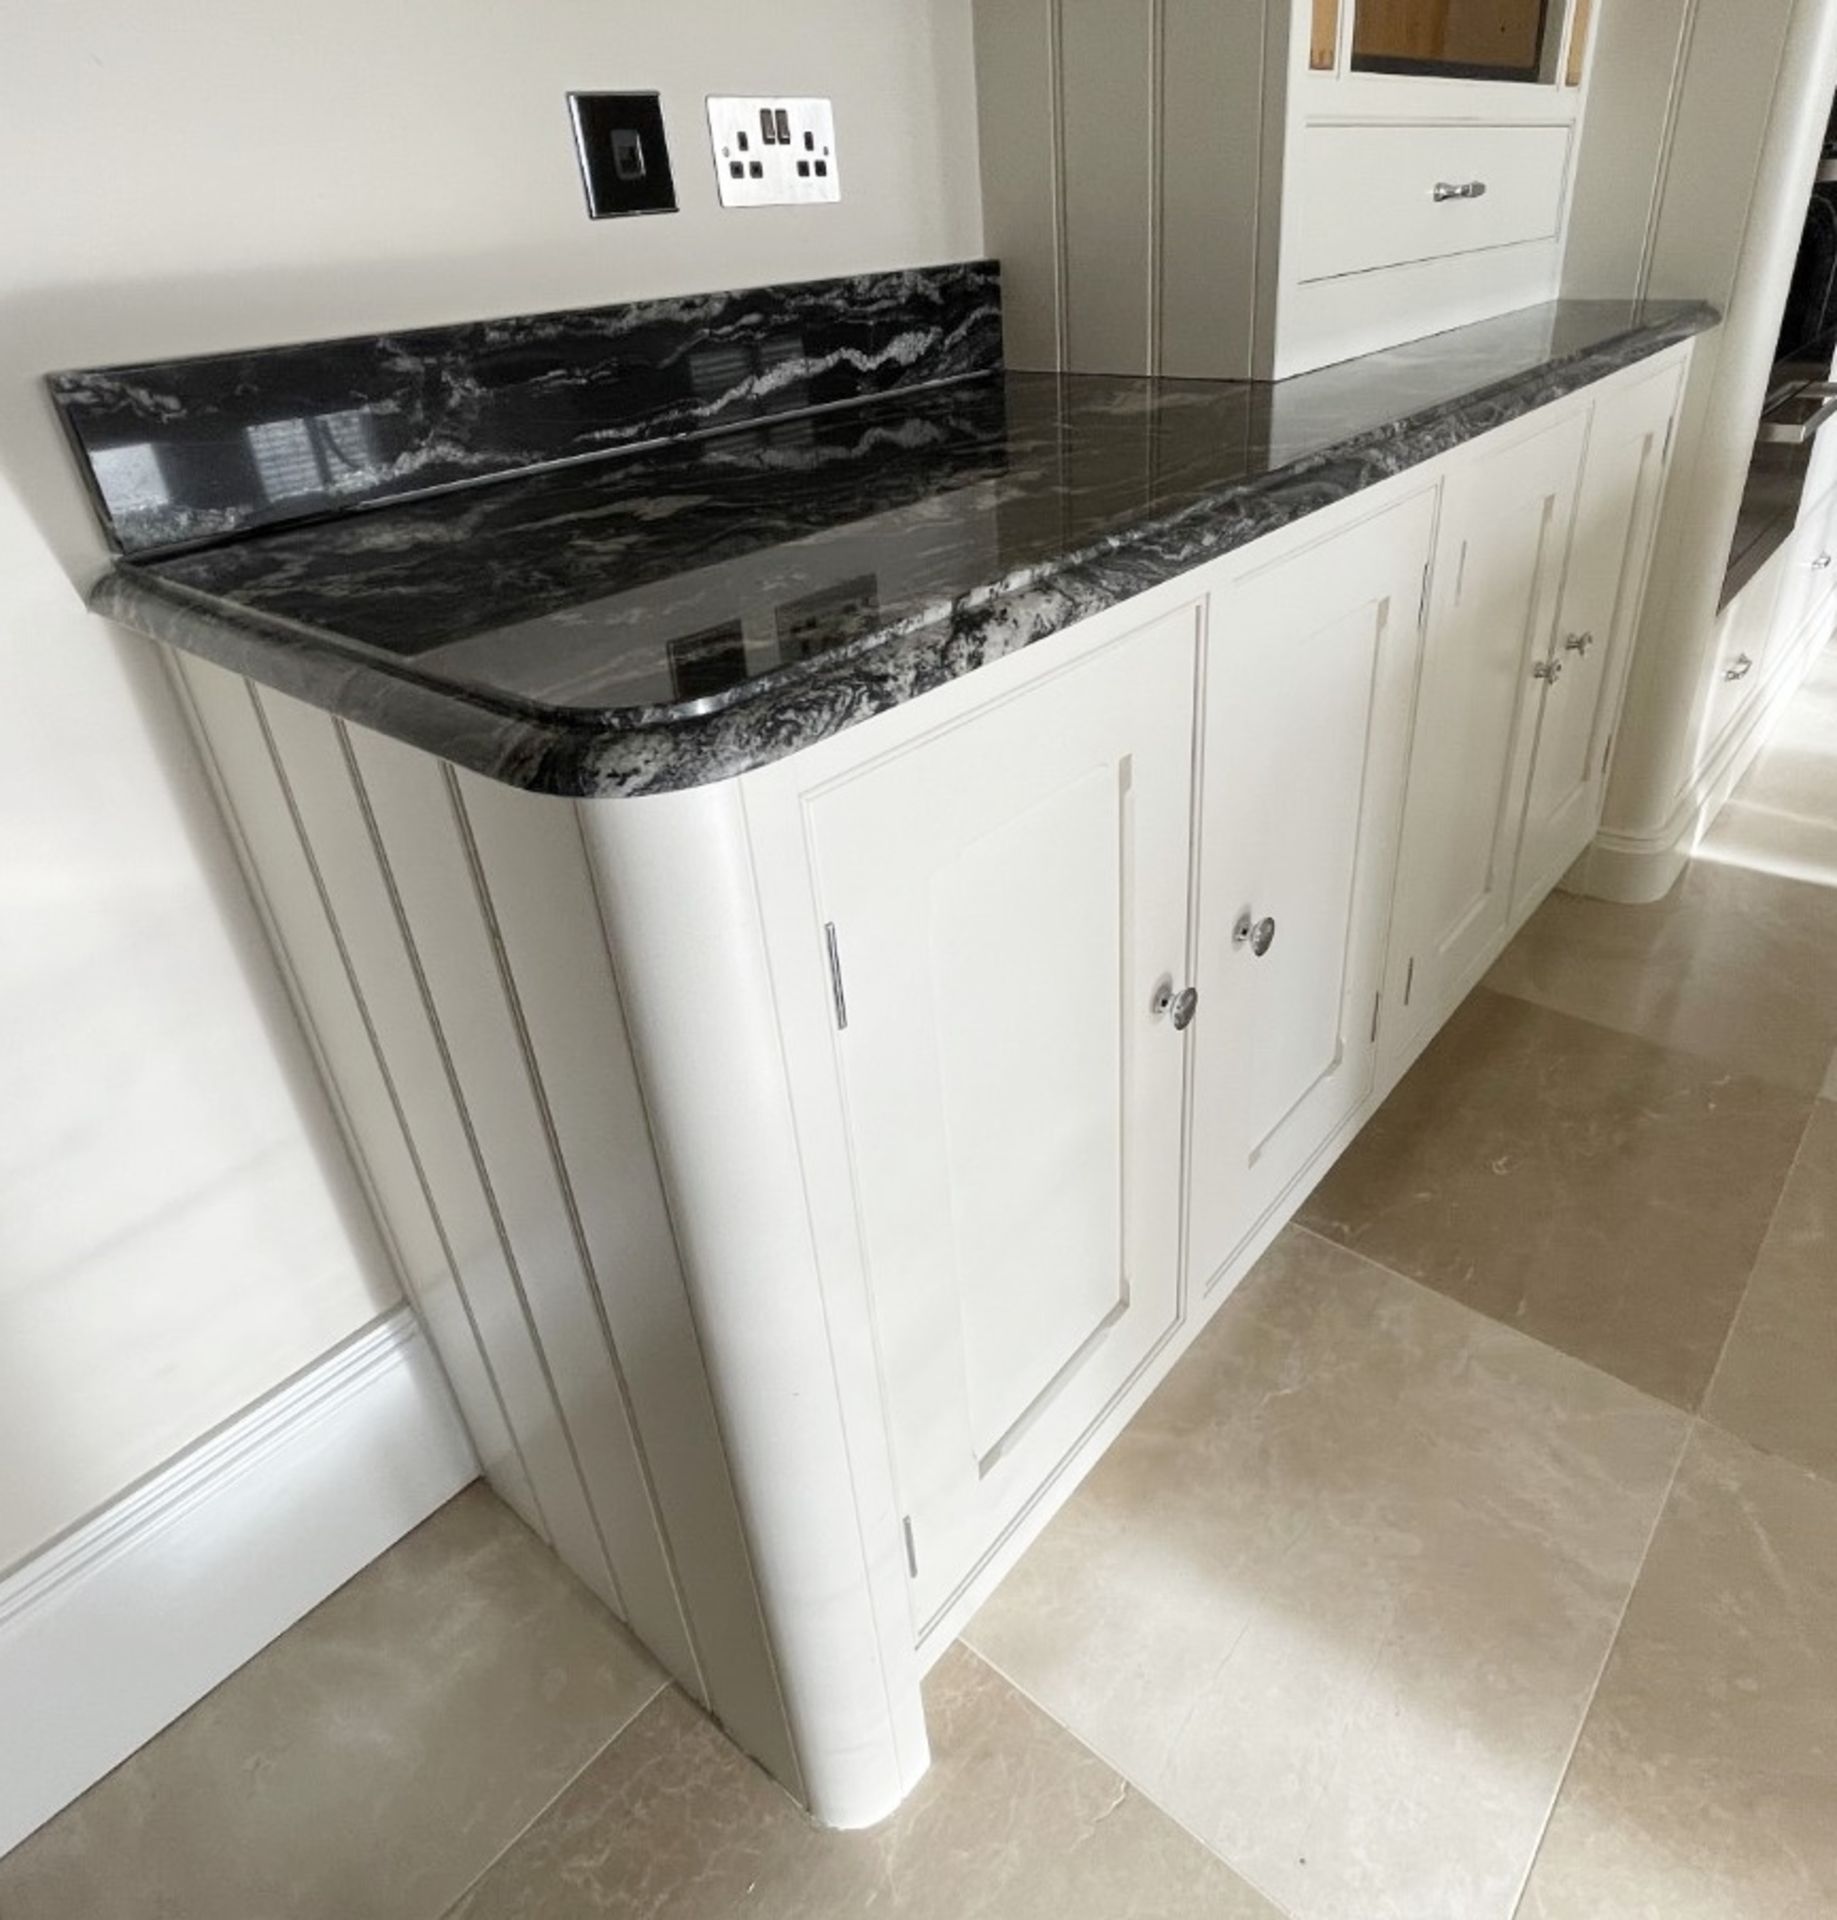 1 x Bespoke Handcrafted Shaker-style Fitted Kitchen Marble Surfaces, Island & Miele Appliances - Image 205 of 221